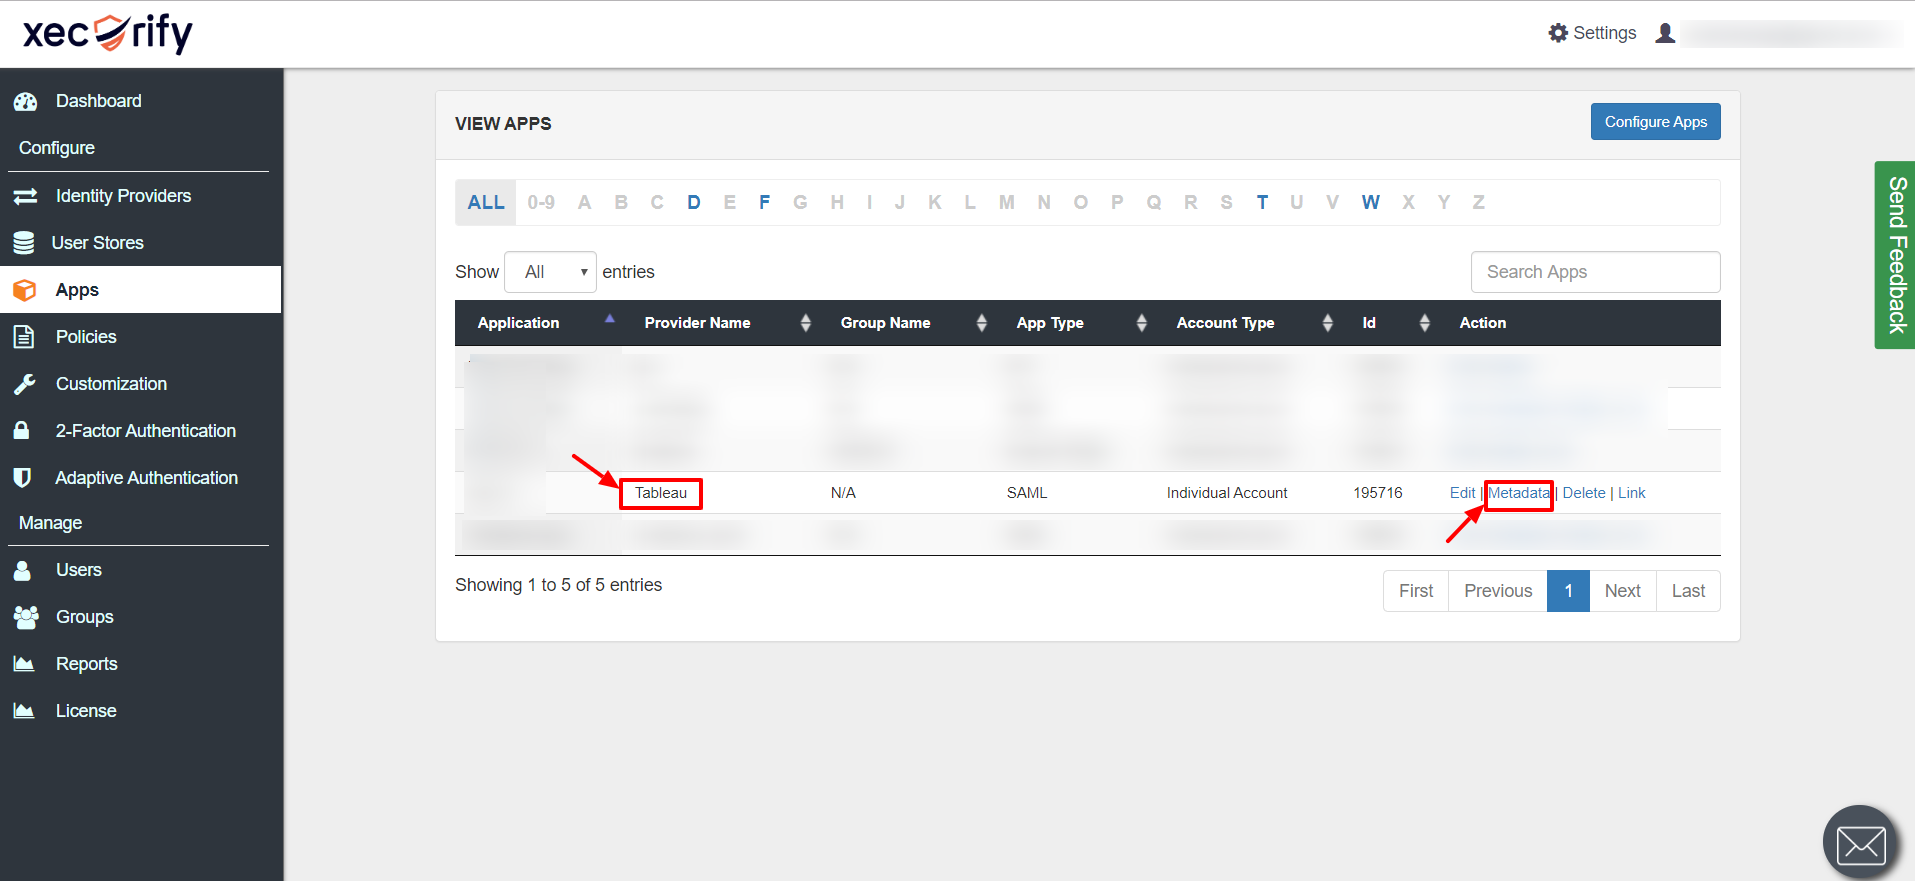 Tableau Single Sign-On (SSO): Go to Metadata Link